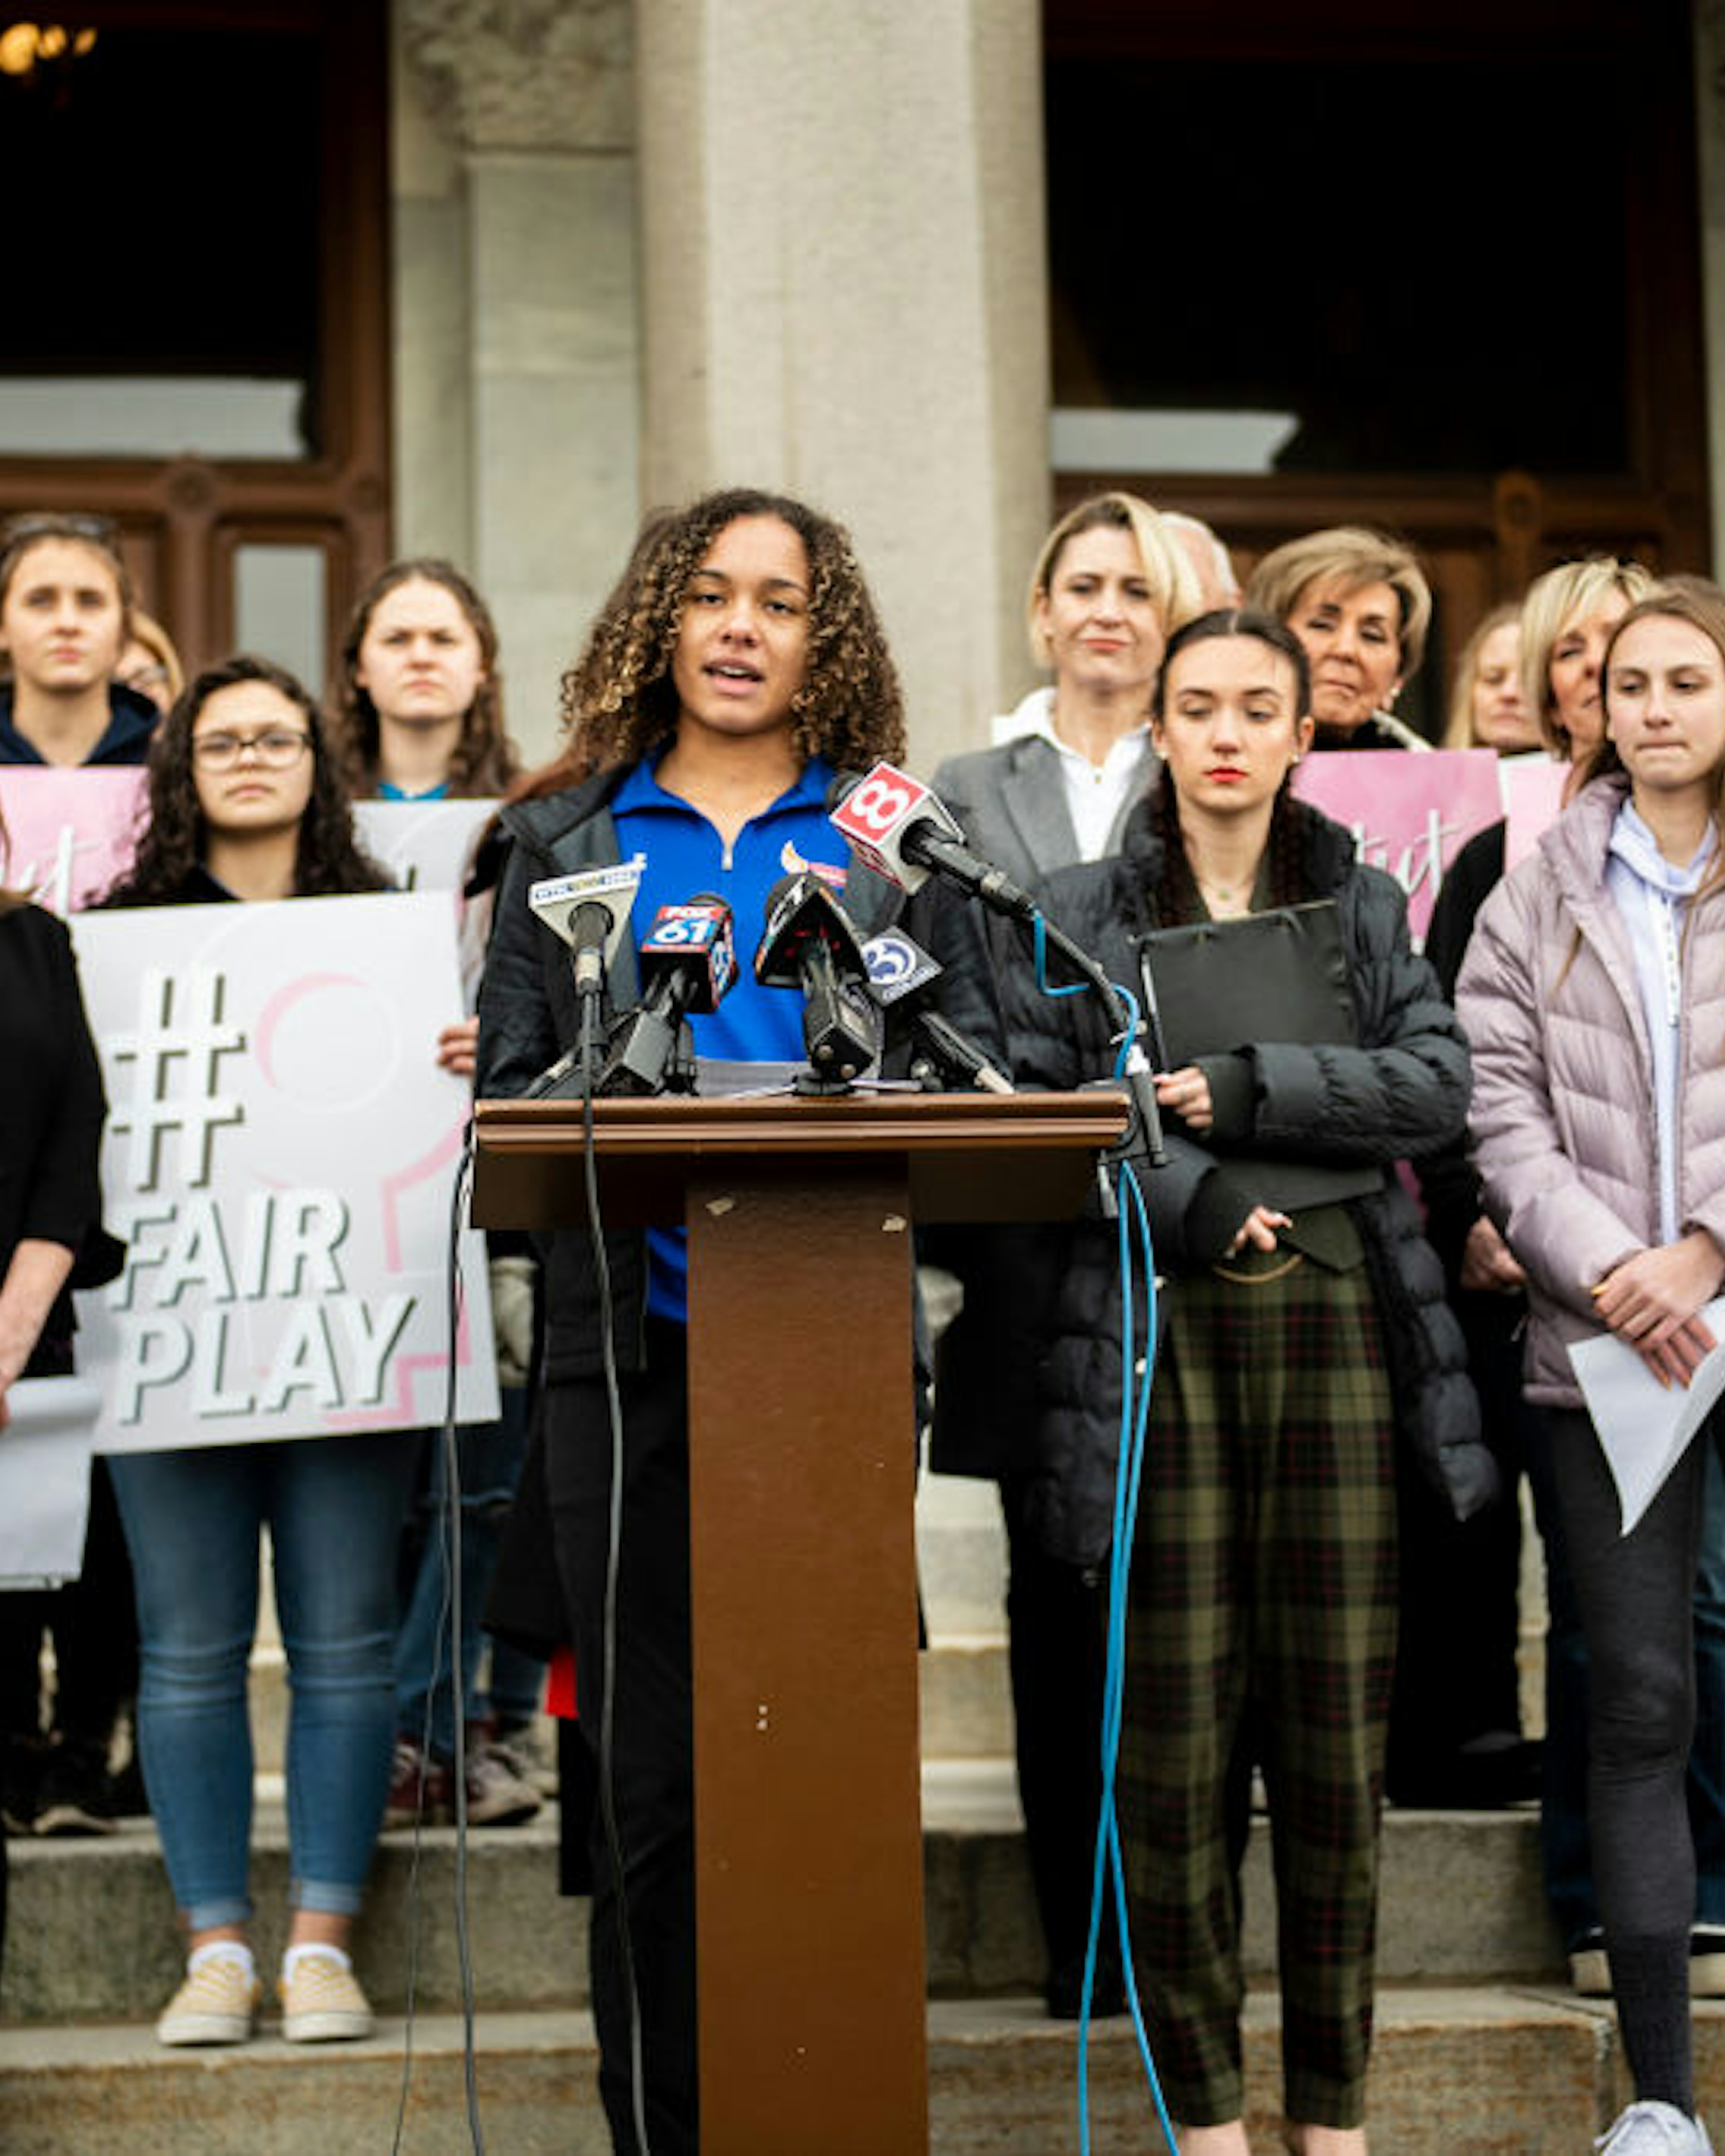 Danbury High School sophomore Alanna Smith speaks during a press conference at the Connecticut State Capitol Wednesday, Feb. 12, 2020, in downtown Hartford, Conn.